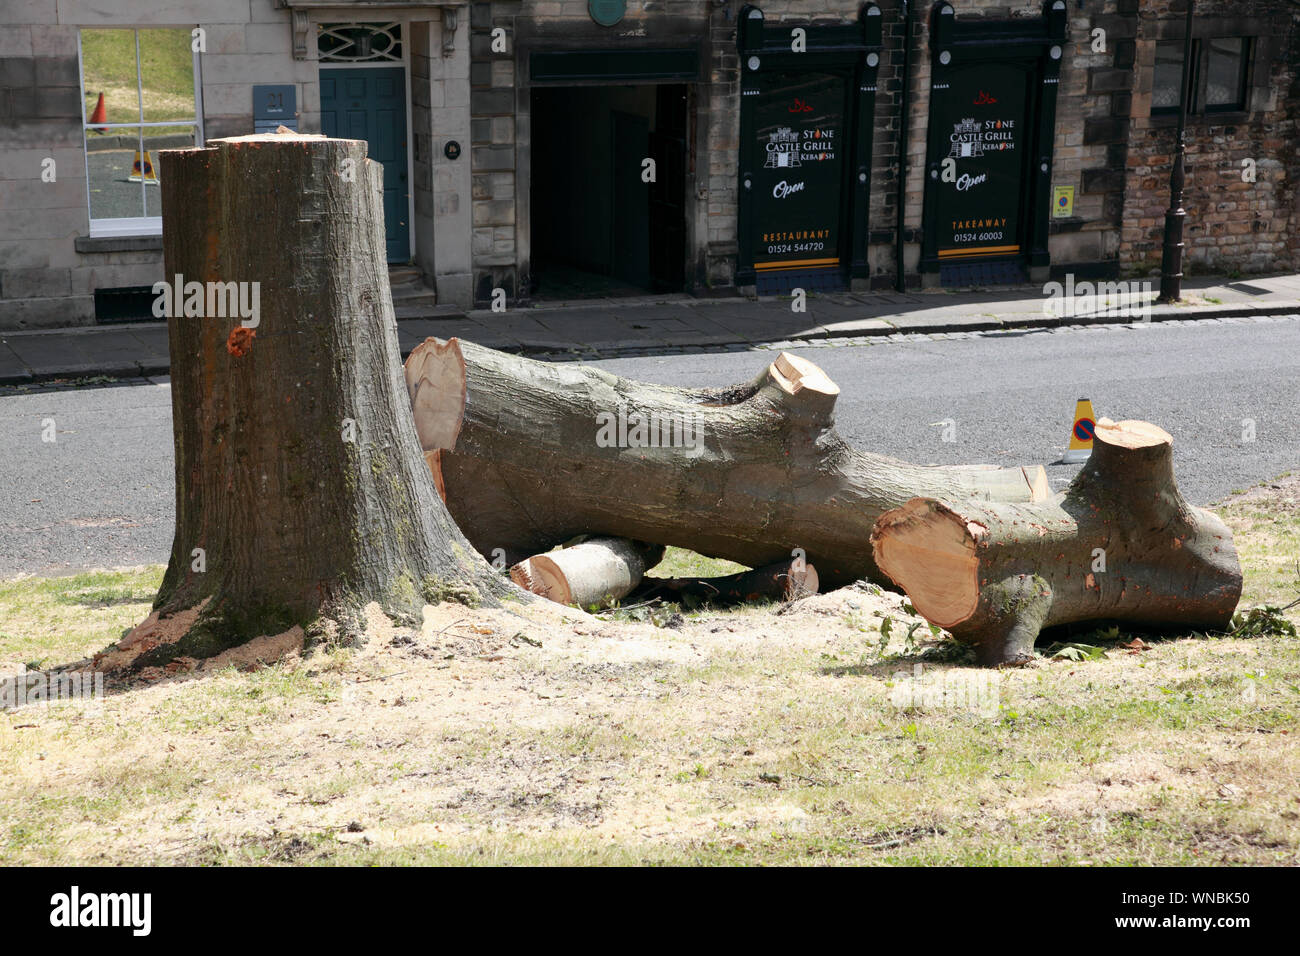 A mature tree felled in Castle Park in Lancaster, northern England Stock Photo